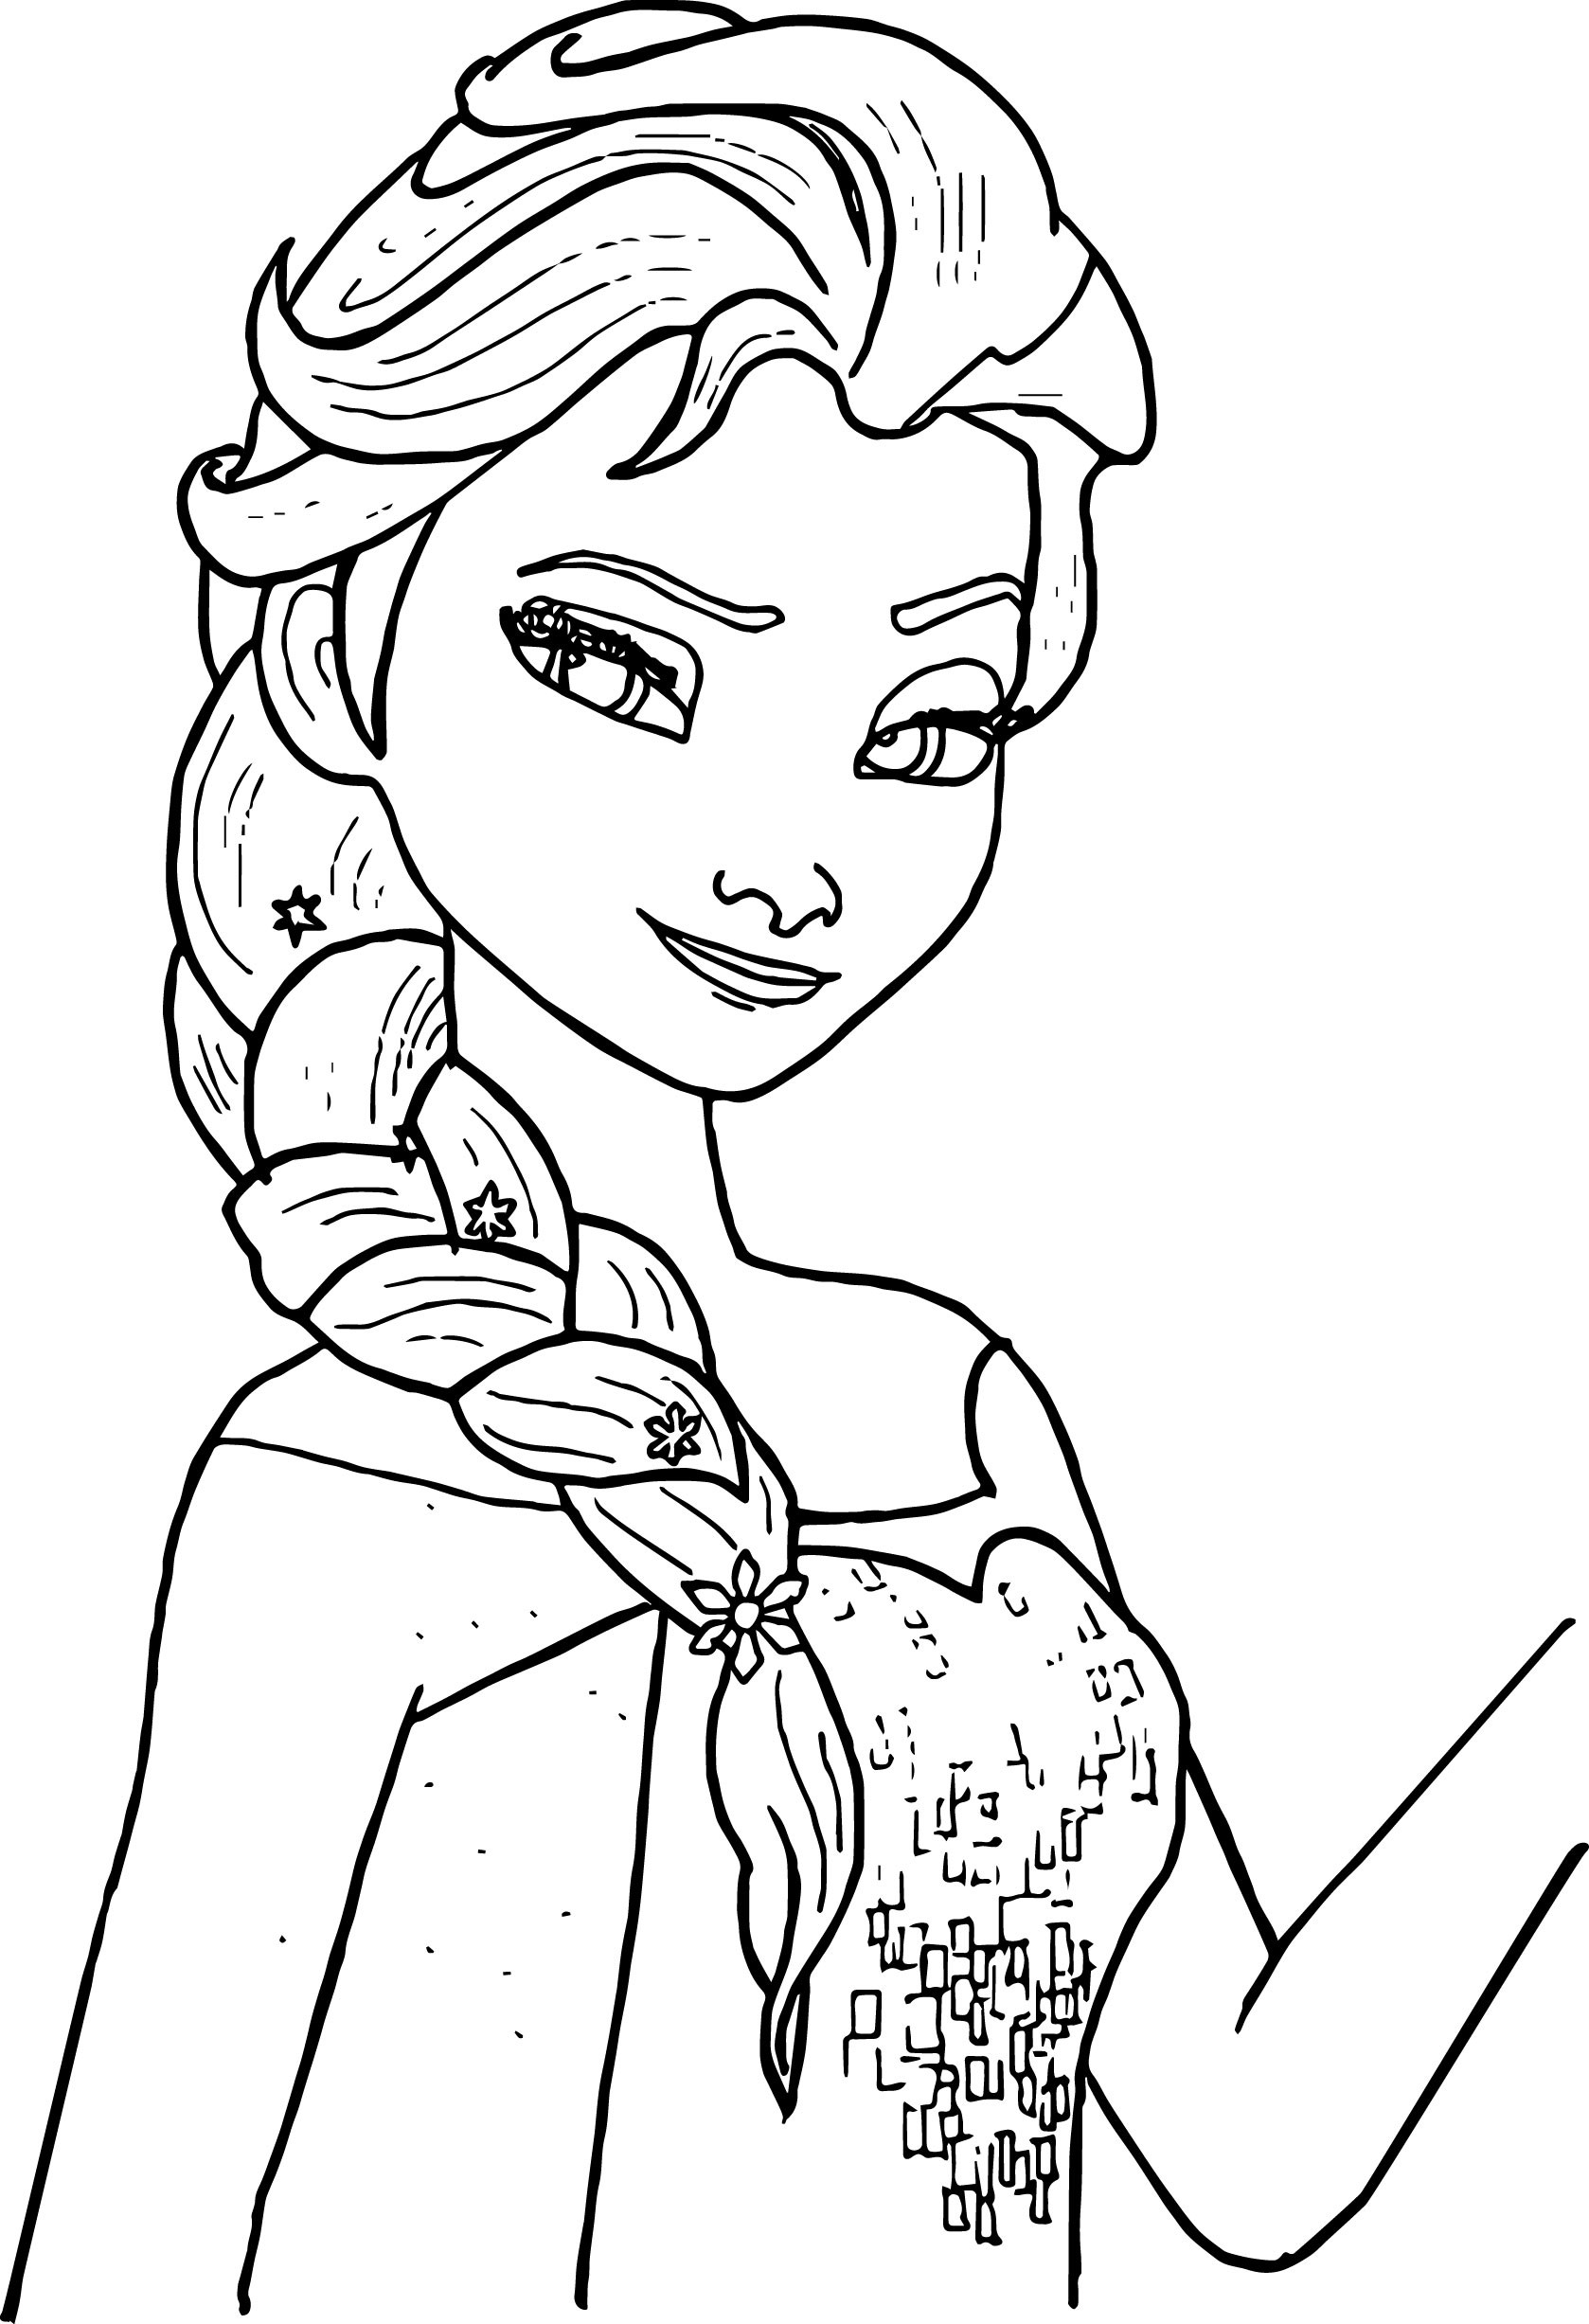 Best Free Coloring Sheets For Kids Printables
 Free Printable Elsa Coloring Pages for Kids Best